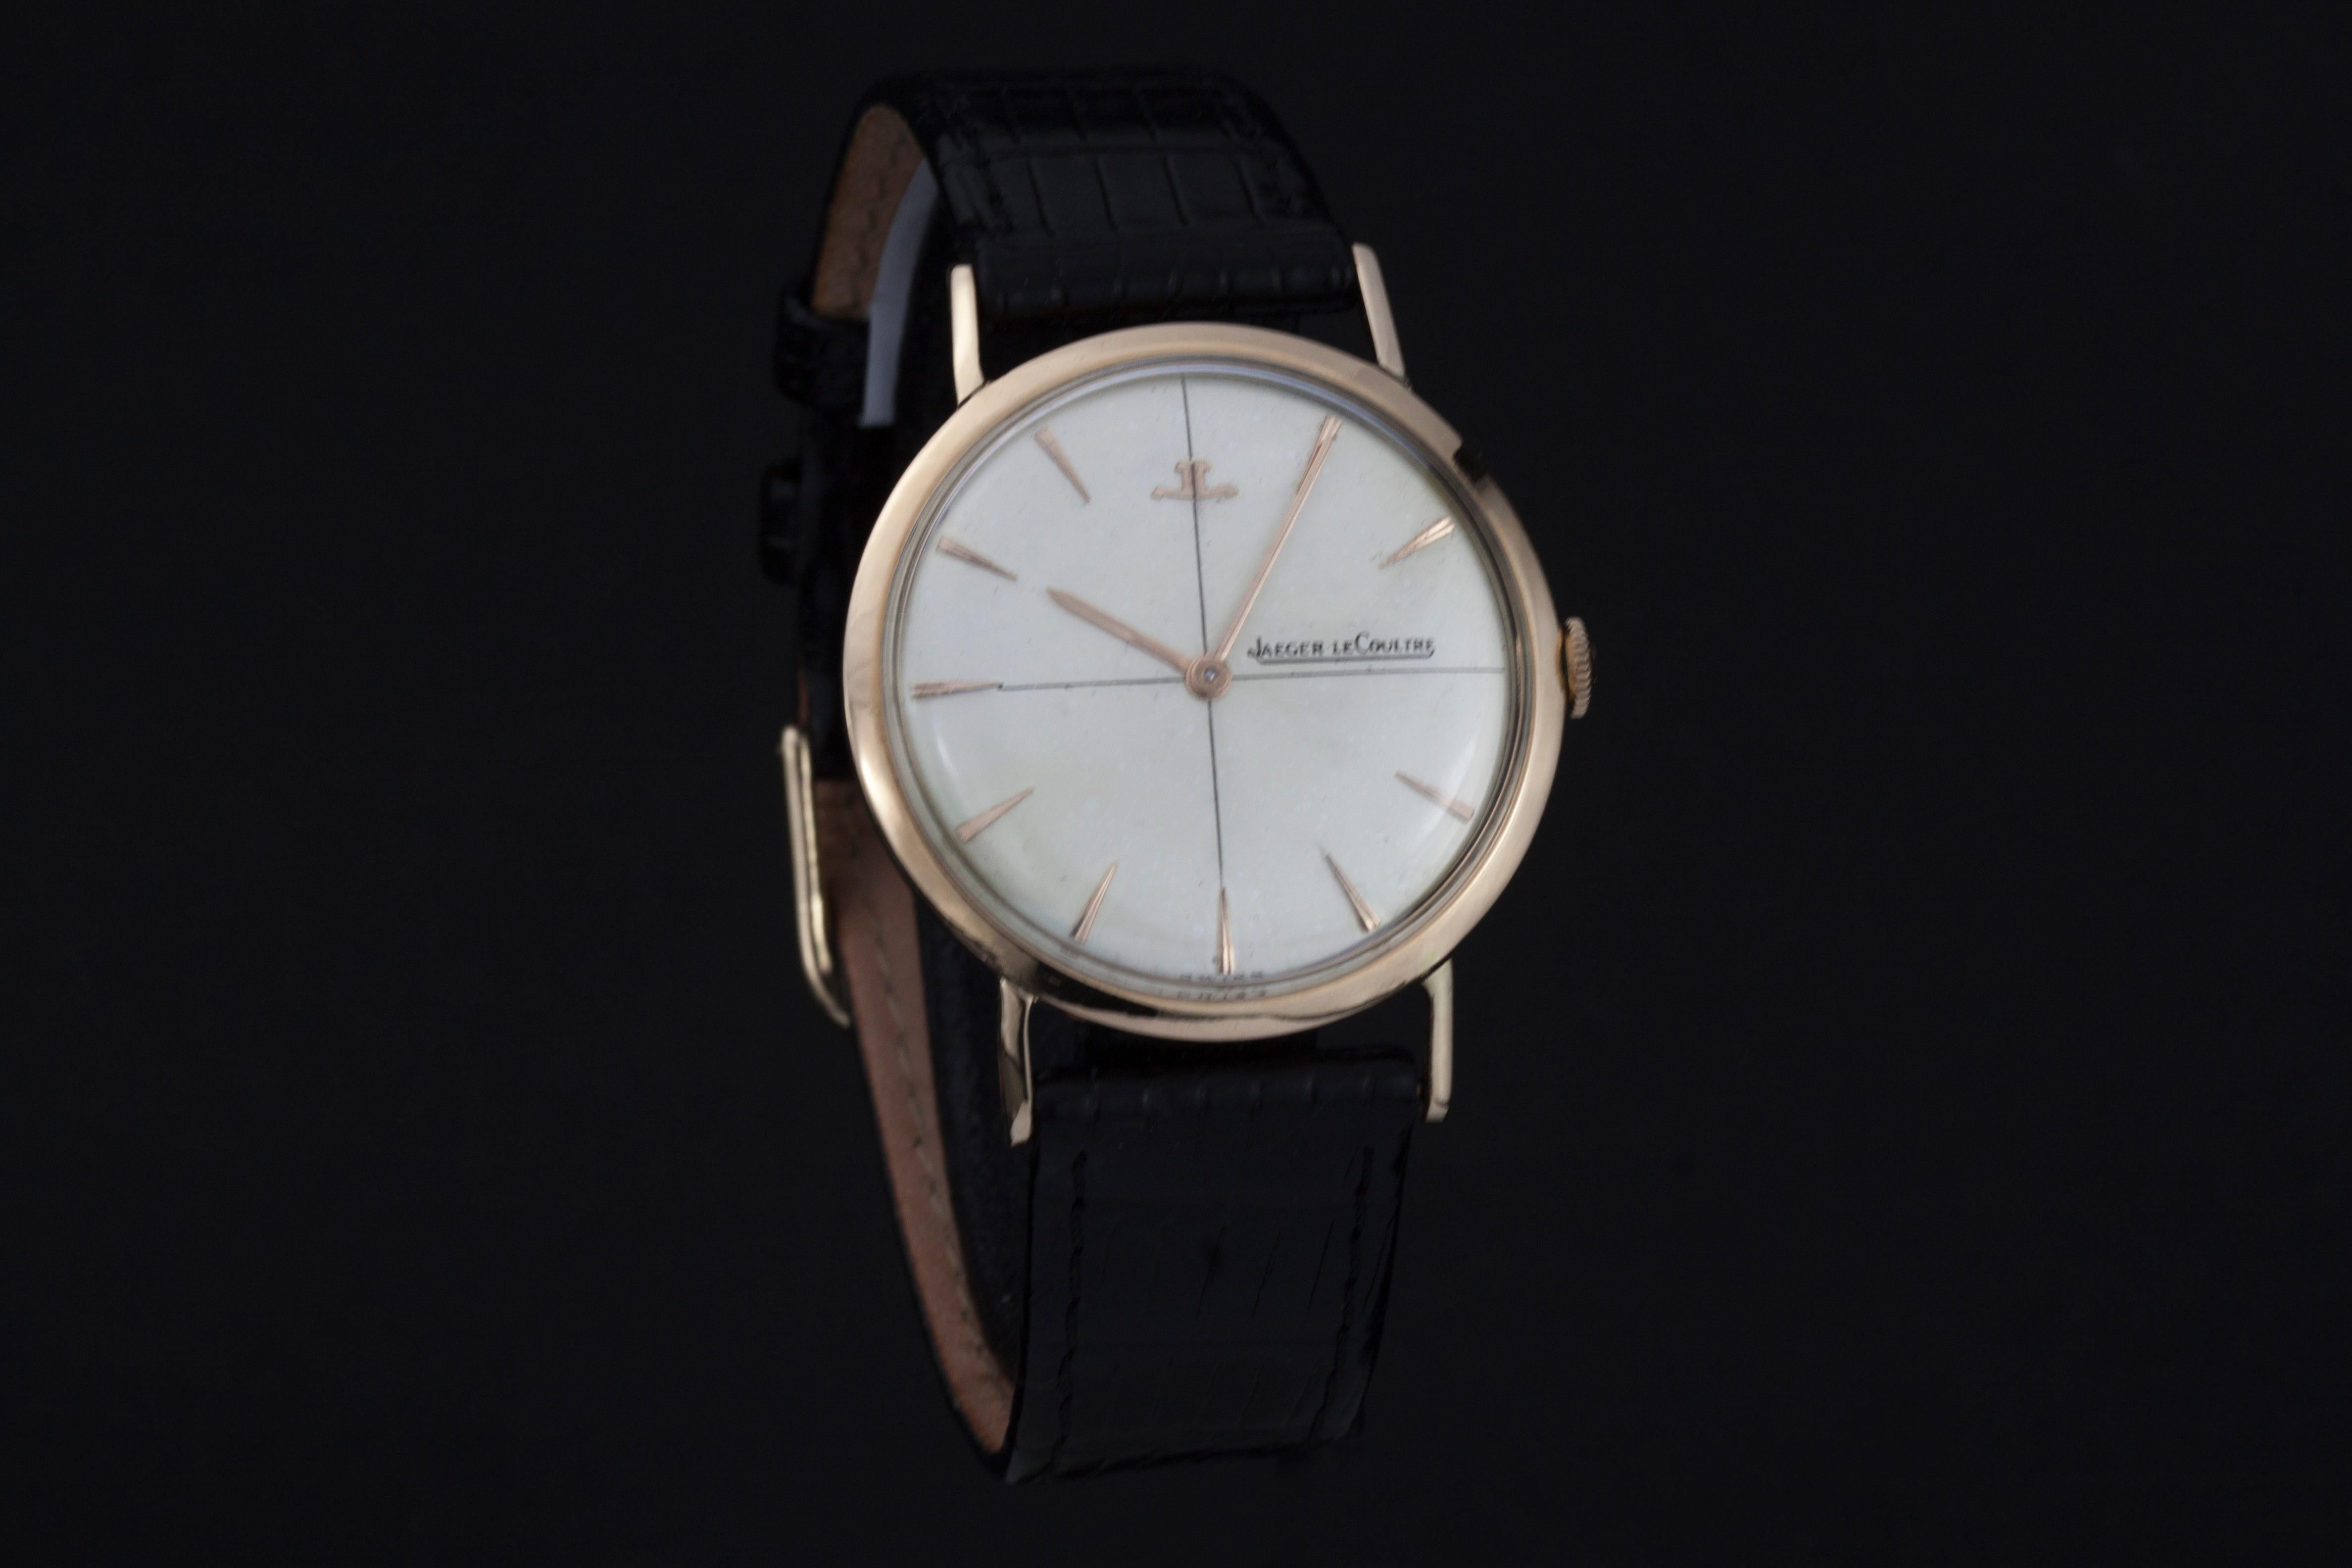 Jaeger-LeCoultre Vintage 18K Yellow Gold Manual Winding Wristwatch, Circa.1960's

Gender: unisex
Case size: 40 x 36  mm
Movement: manual winding
Watchband Material: Leather
Case material : 18K Gold
Display Type:	Analogue	
Dial: ( See Photos )
Hands: